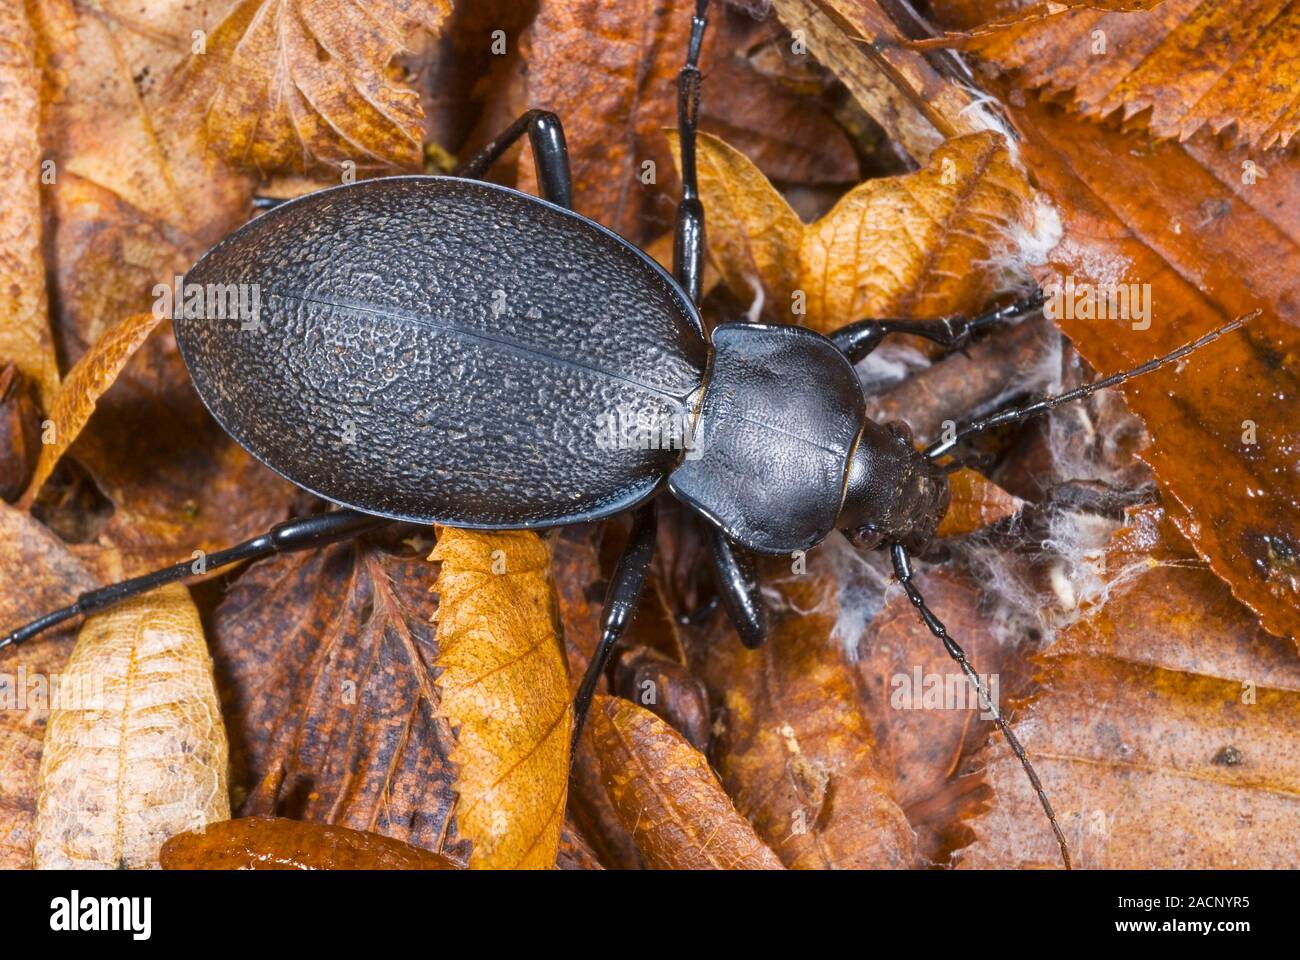 Ground beetle (Carabus coriaceus) on fallen leaves. This species of beetle is widespread in Europe, where it is primarily found in deciduous forests a Stock Photo